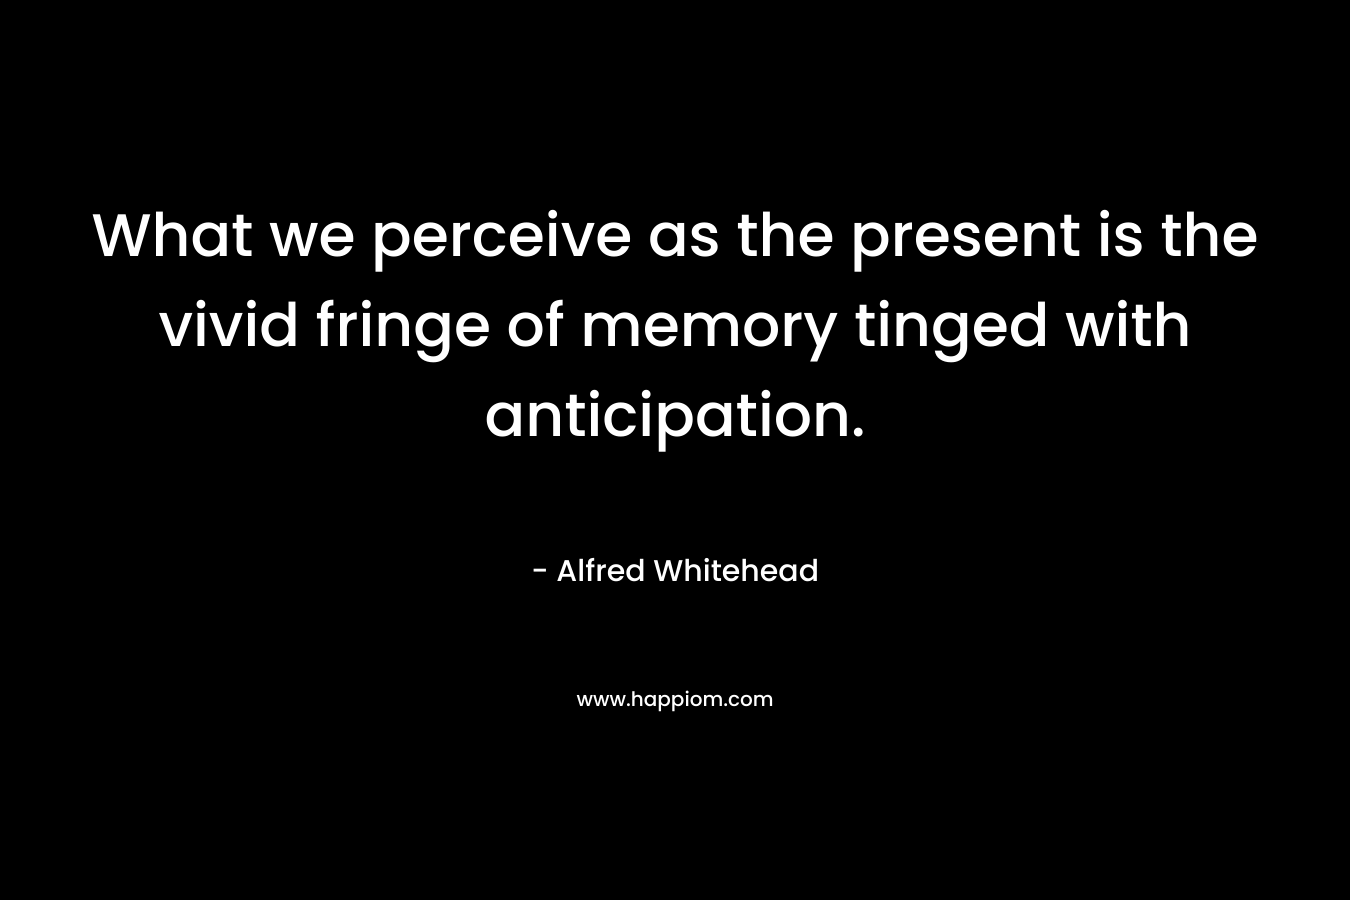 What we perceive as the present is the vivid fringe of memory tinged with anticipation. – Alfred Whitehead